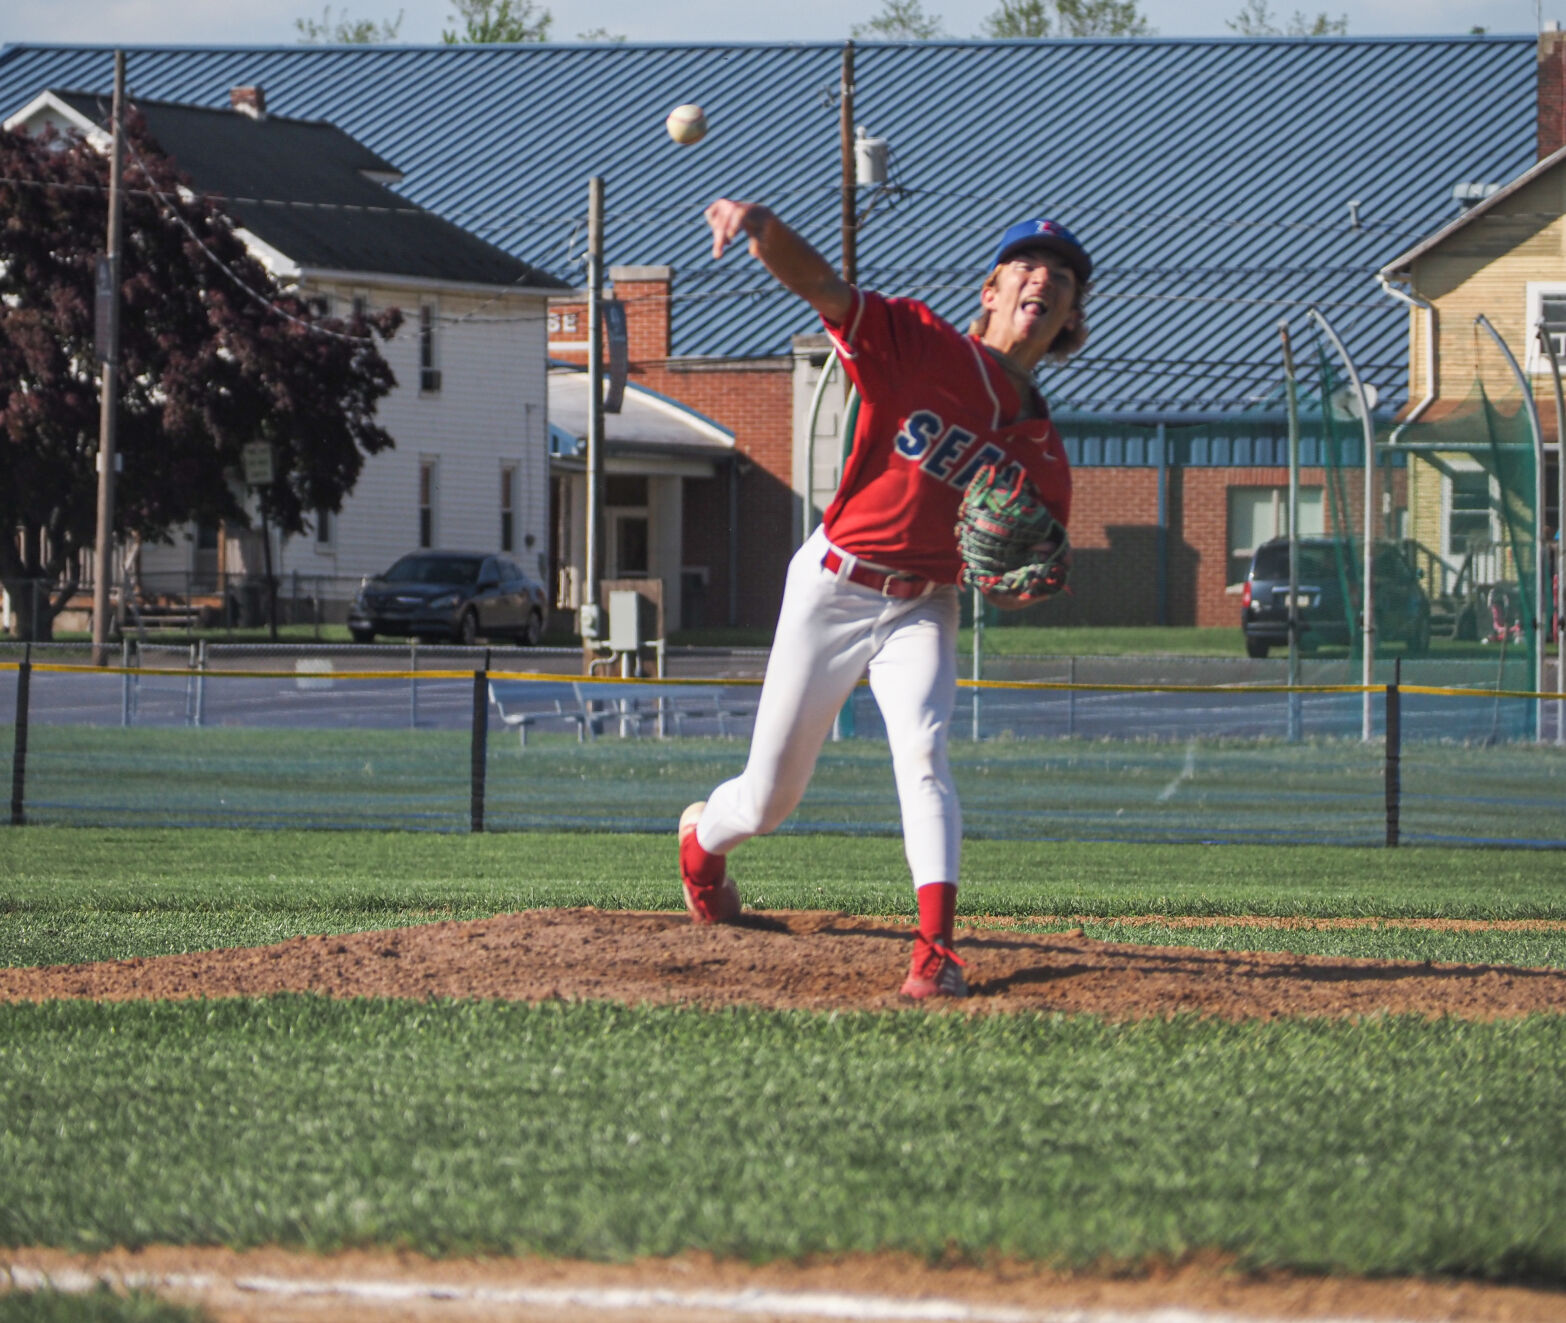 Selinsgrove Baseball Prevails in Exciting 8-7 Win as Domaracki Shines